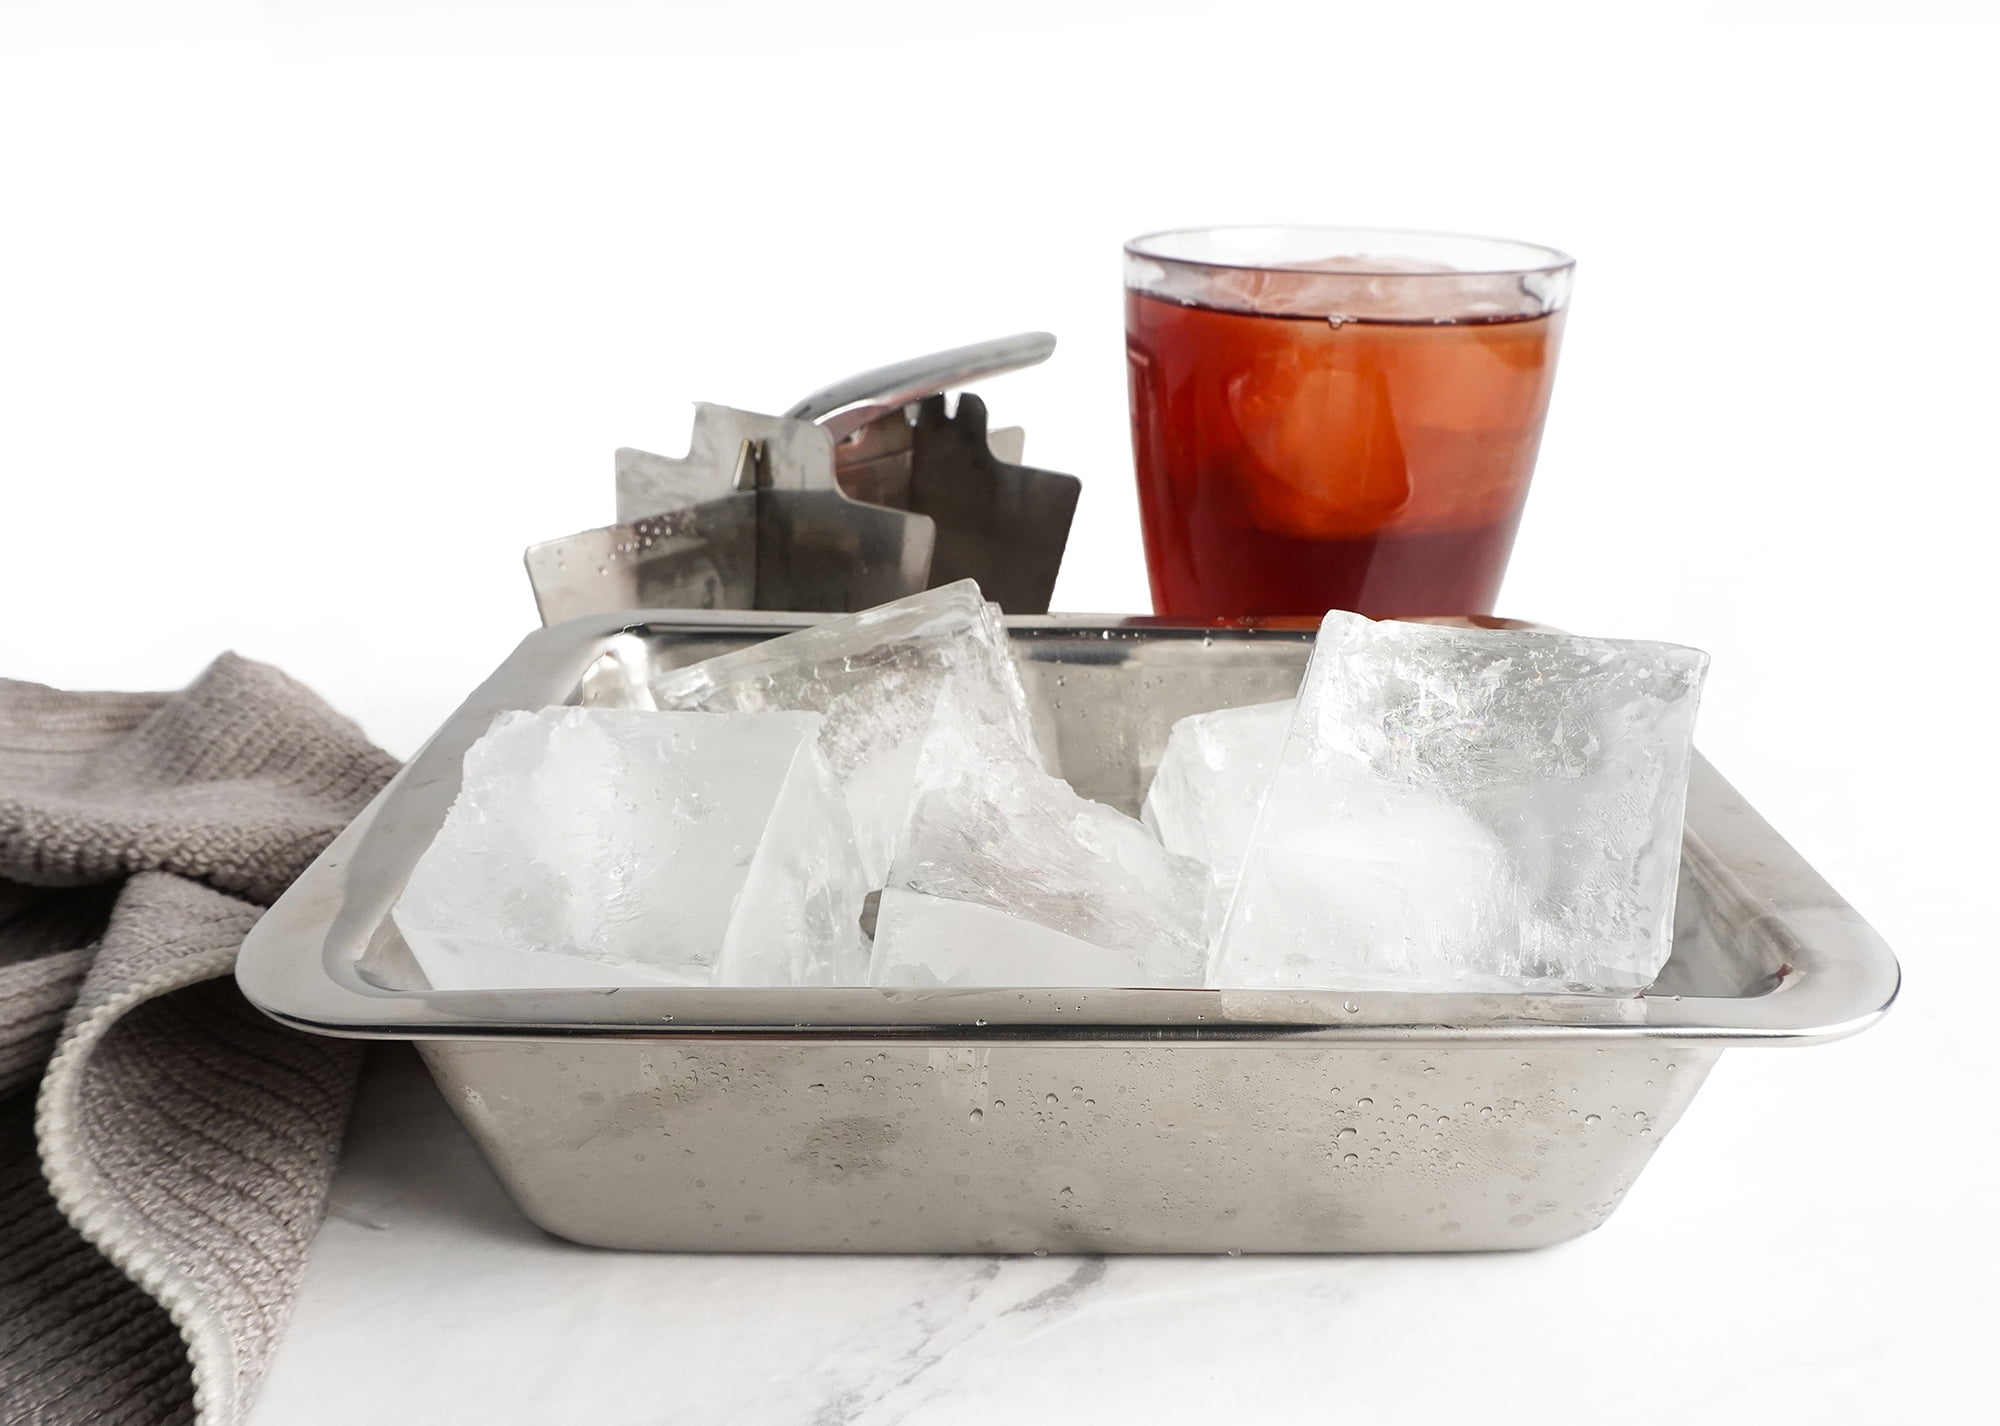 RSVP Endurance 18/8 Stainless Steel Set of Ice Cube Trays, Vintage Inspired  (1) and Large (1)